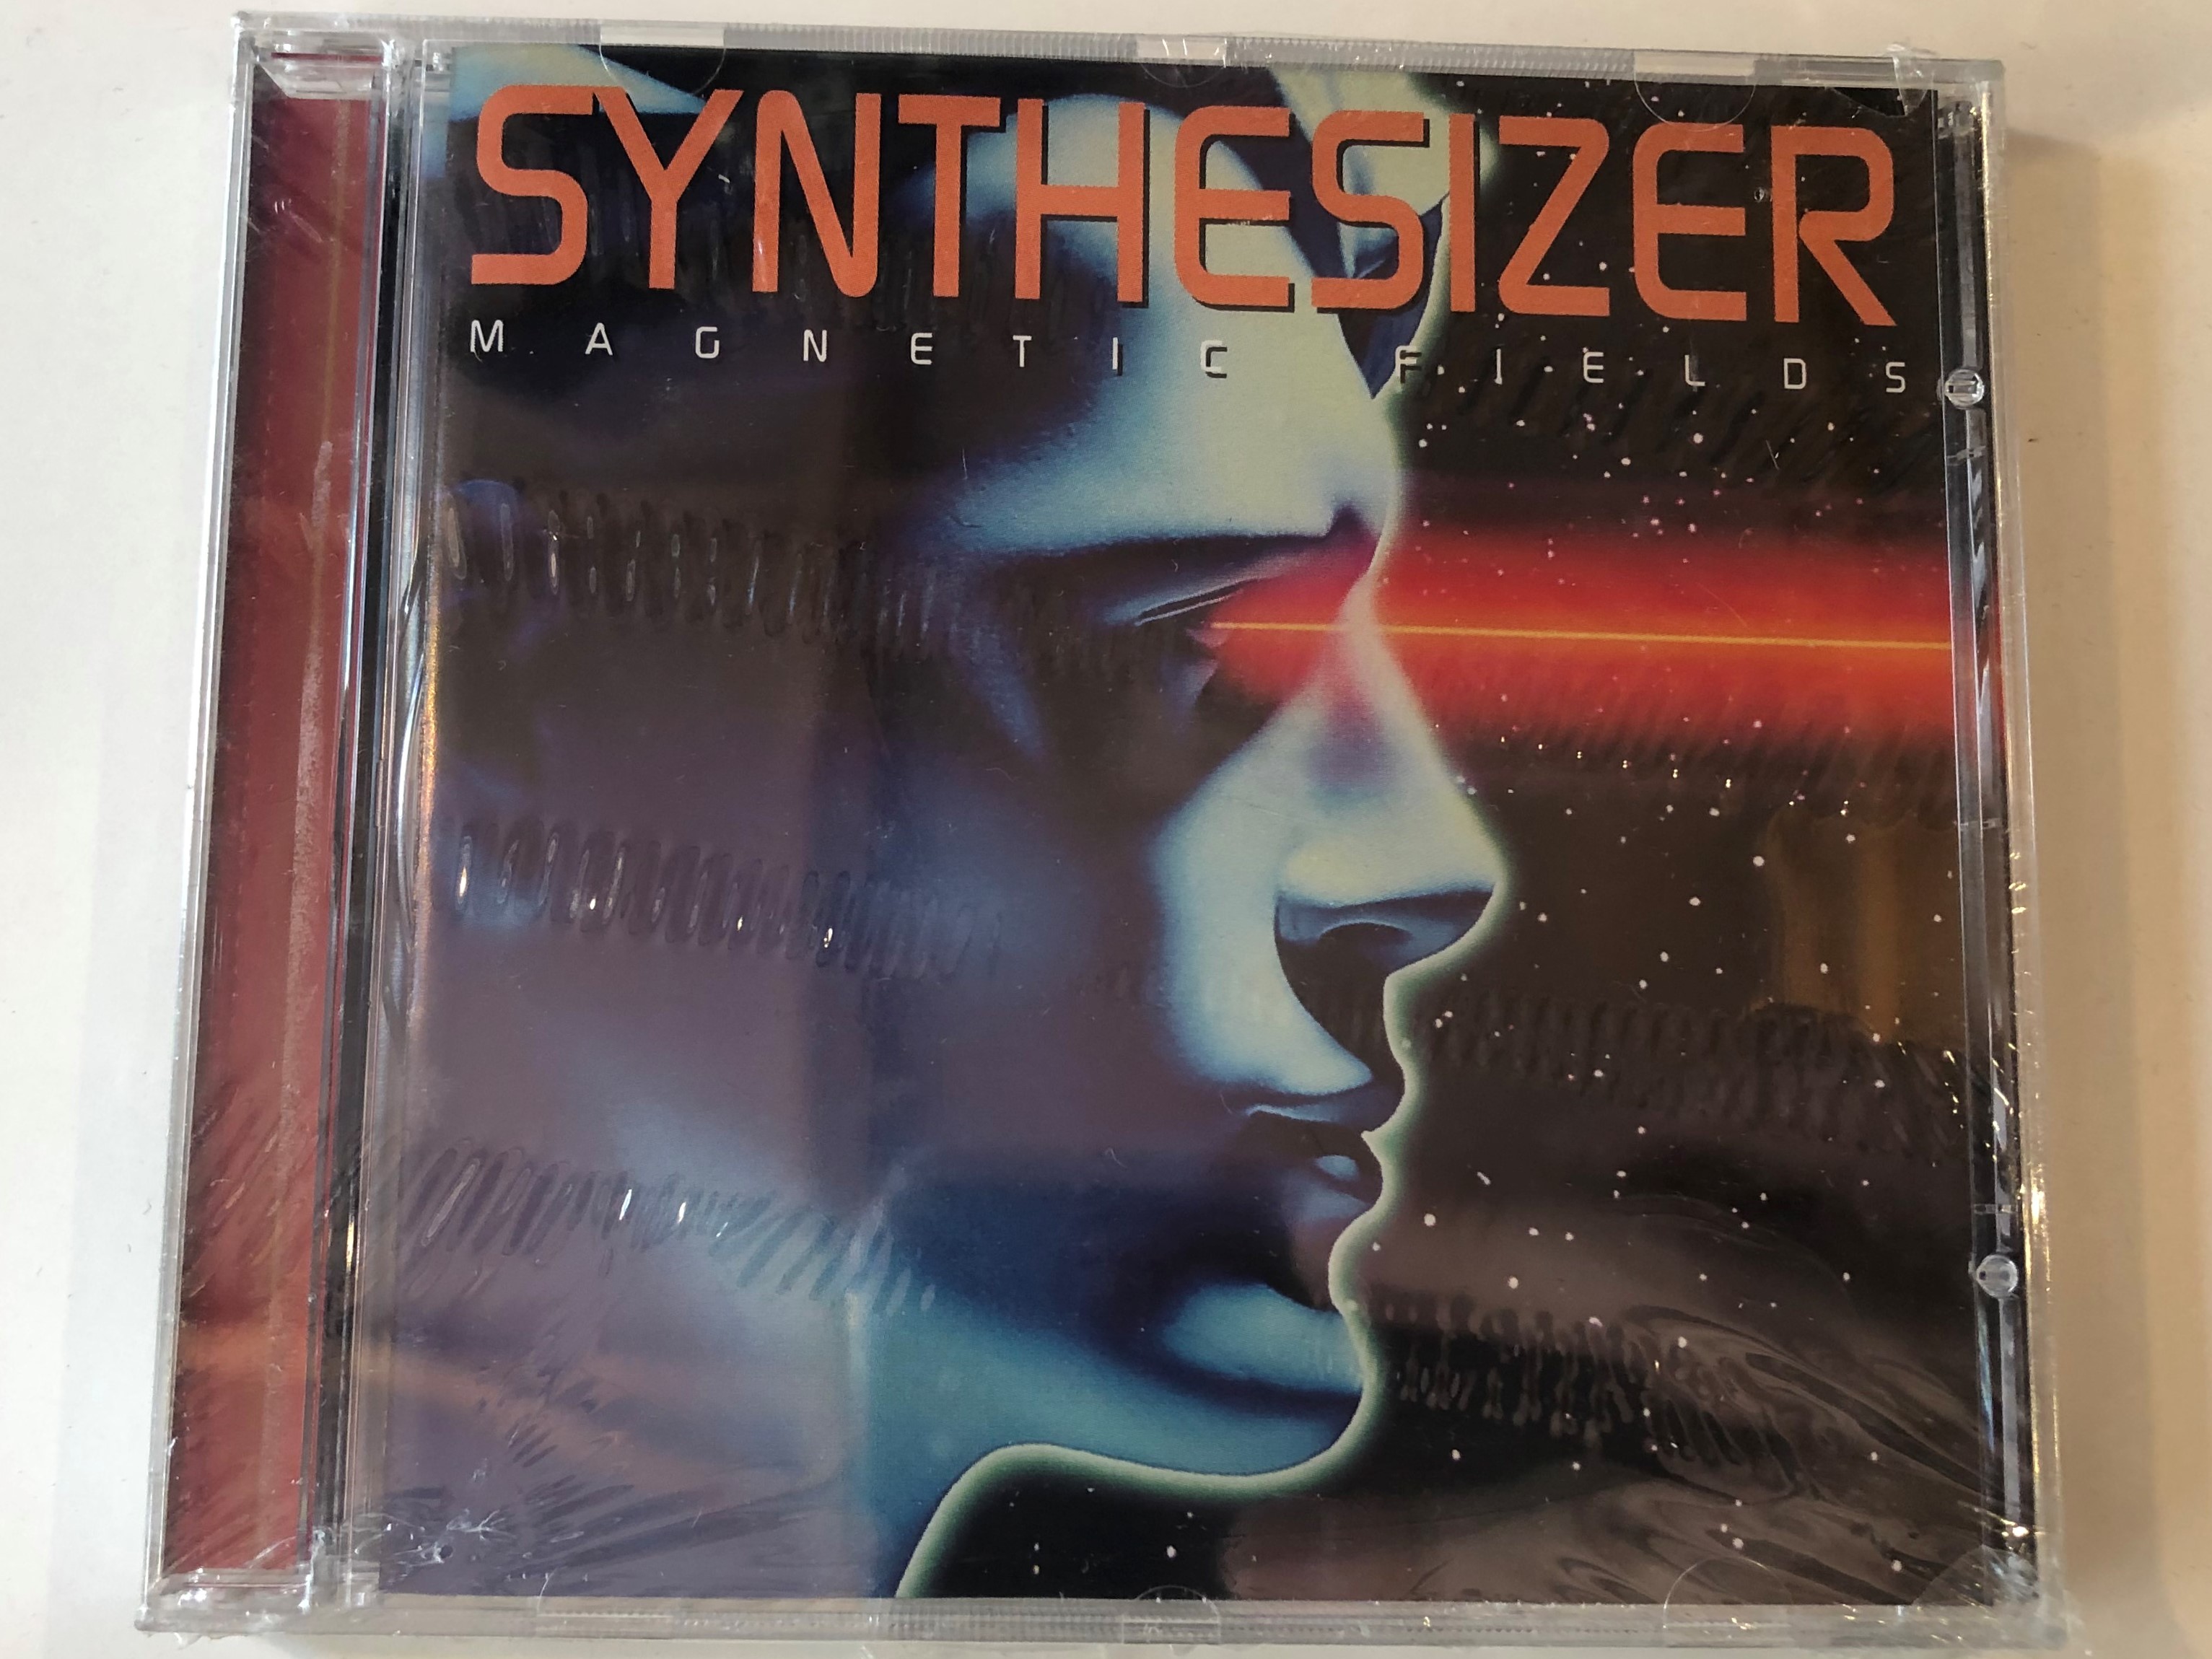 synthesizer-magnetic-fields-elap-music-audio-cd-1997-5703185374618-1-.jpg